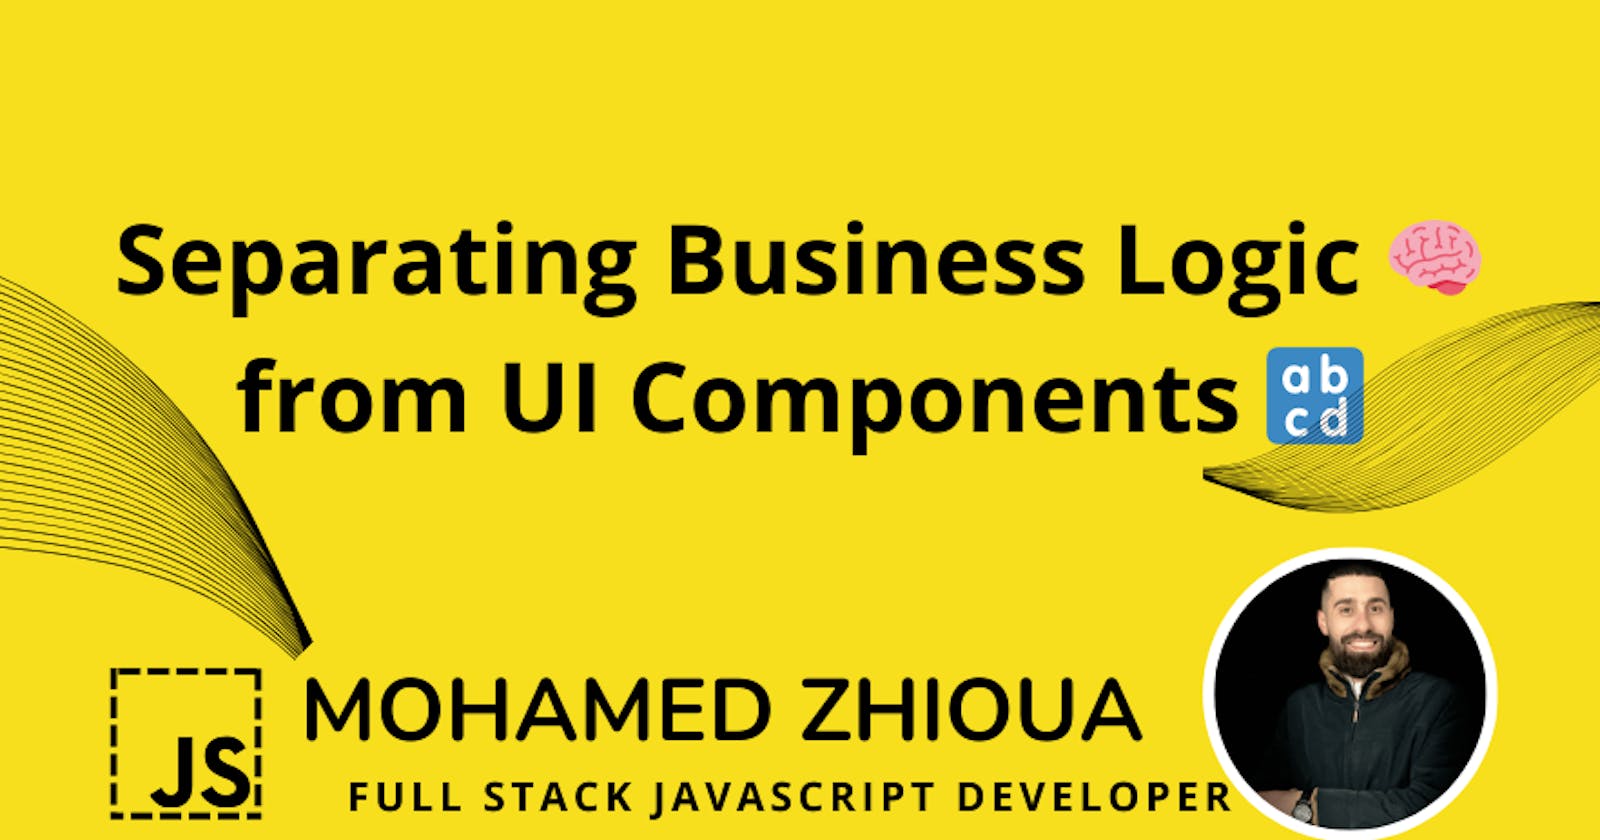 Separating⛓️ Business Logic 🧠from UI Components 🔡